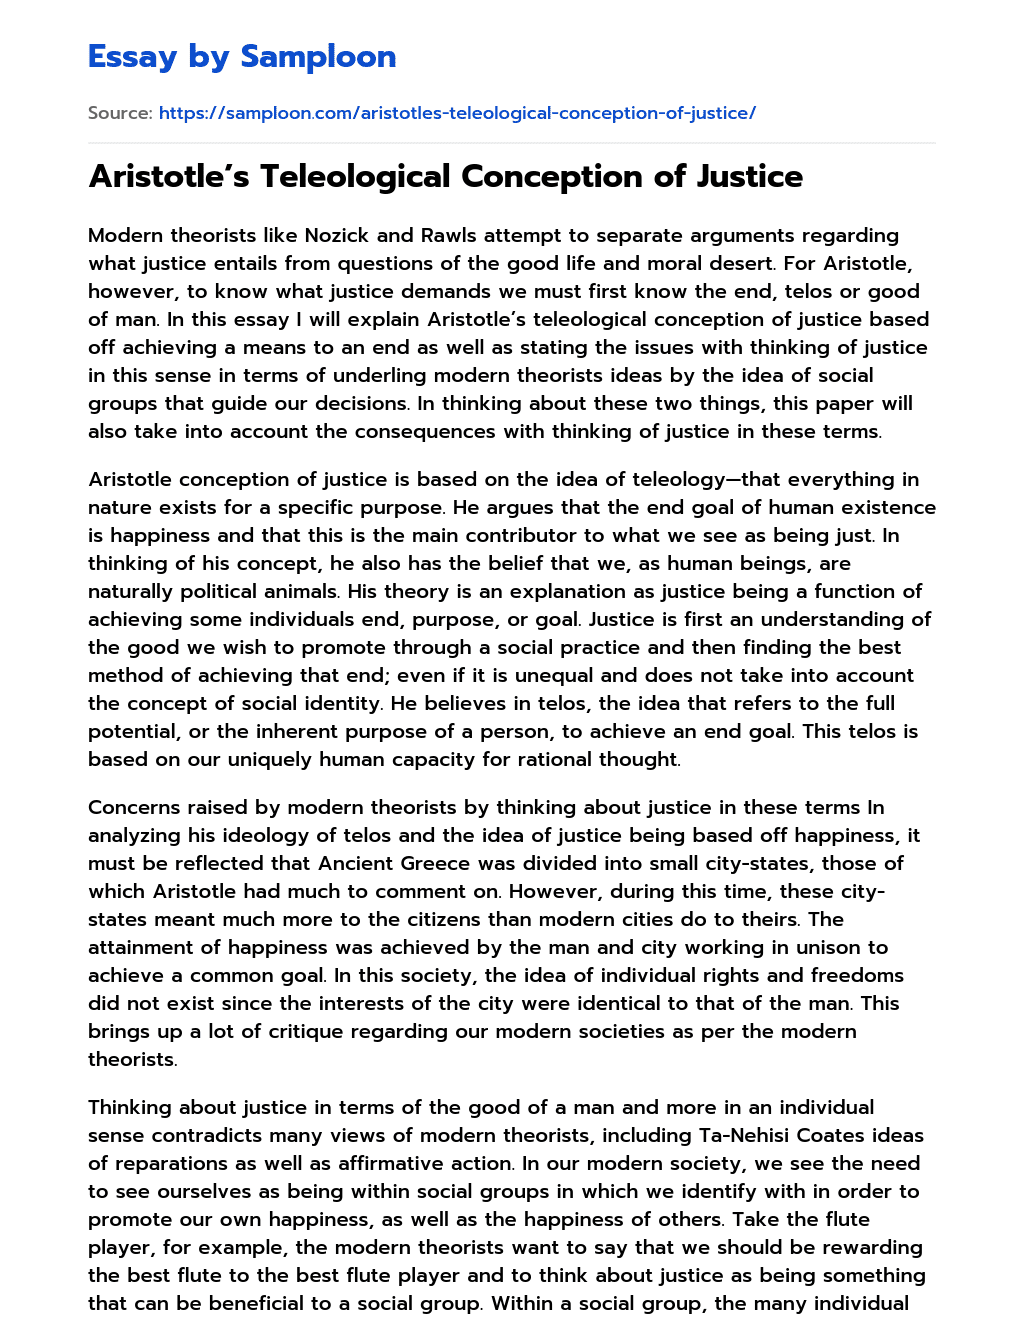 Aristotle’s Teleological Conception of Justice essay